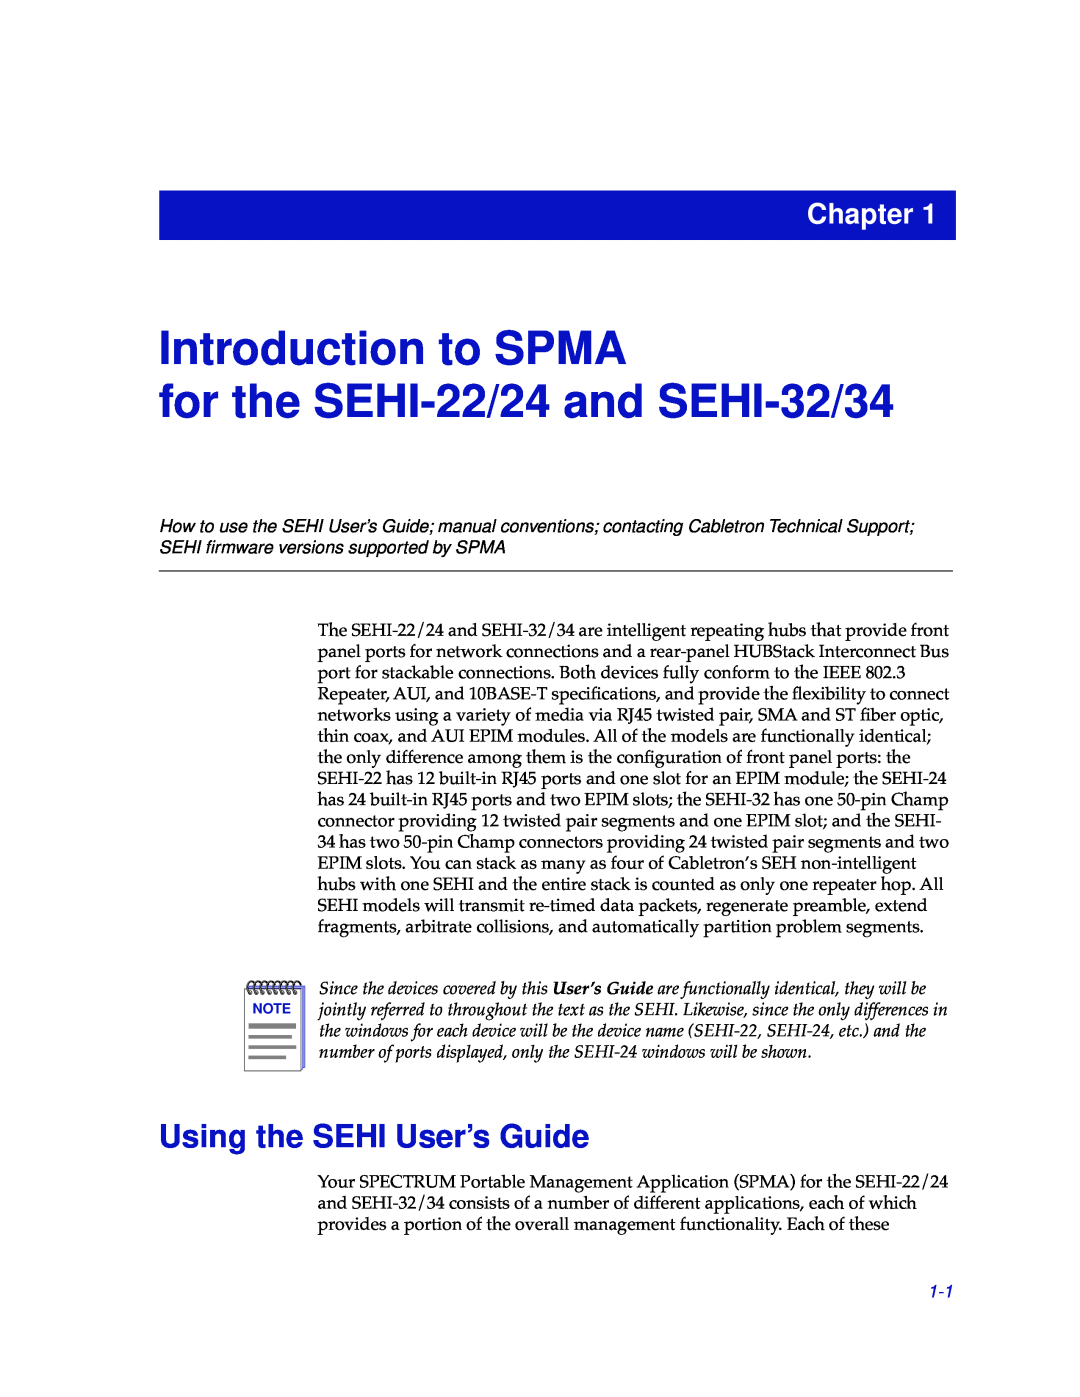 Cabletron Systems manual Introduction to SPMA for the SEHI-22/24 and SEHI-32/34, Using the SEHI User’s Guide, Chapter 